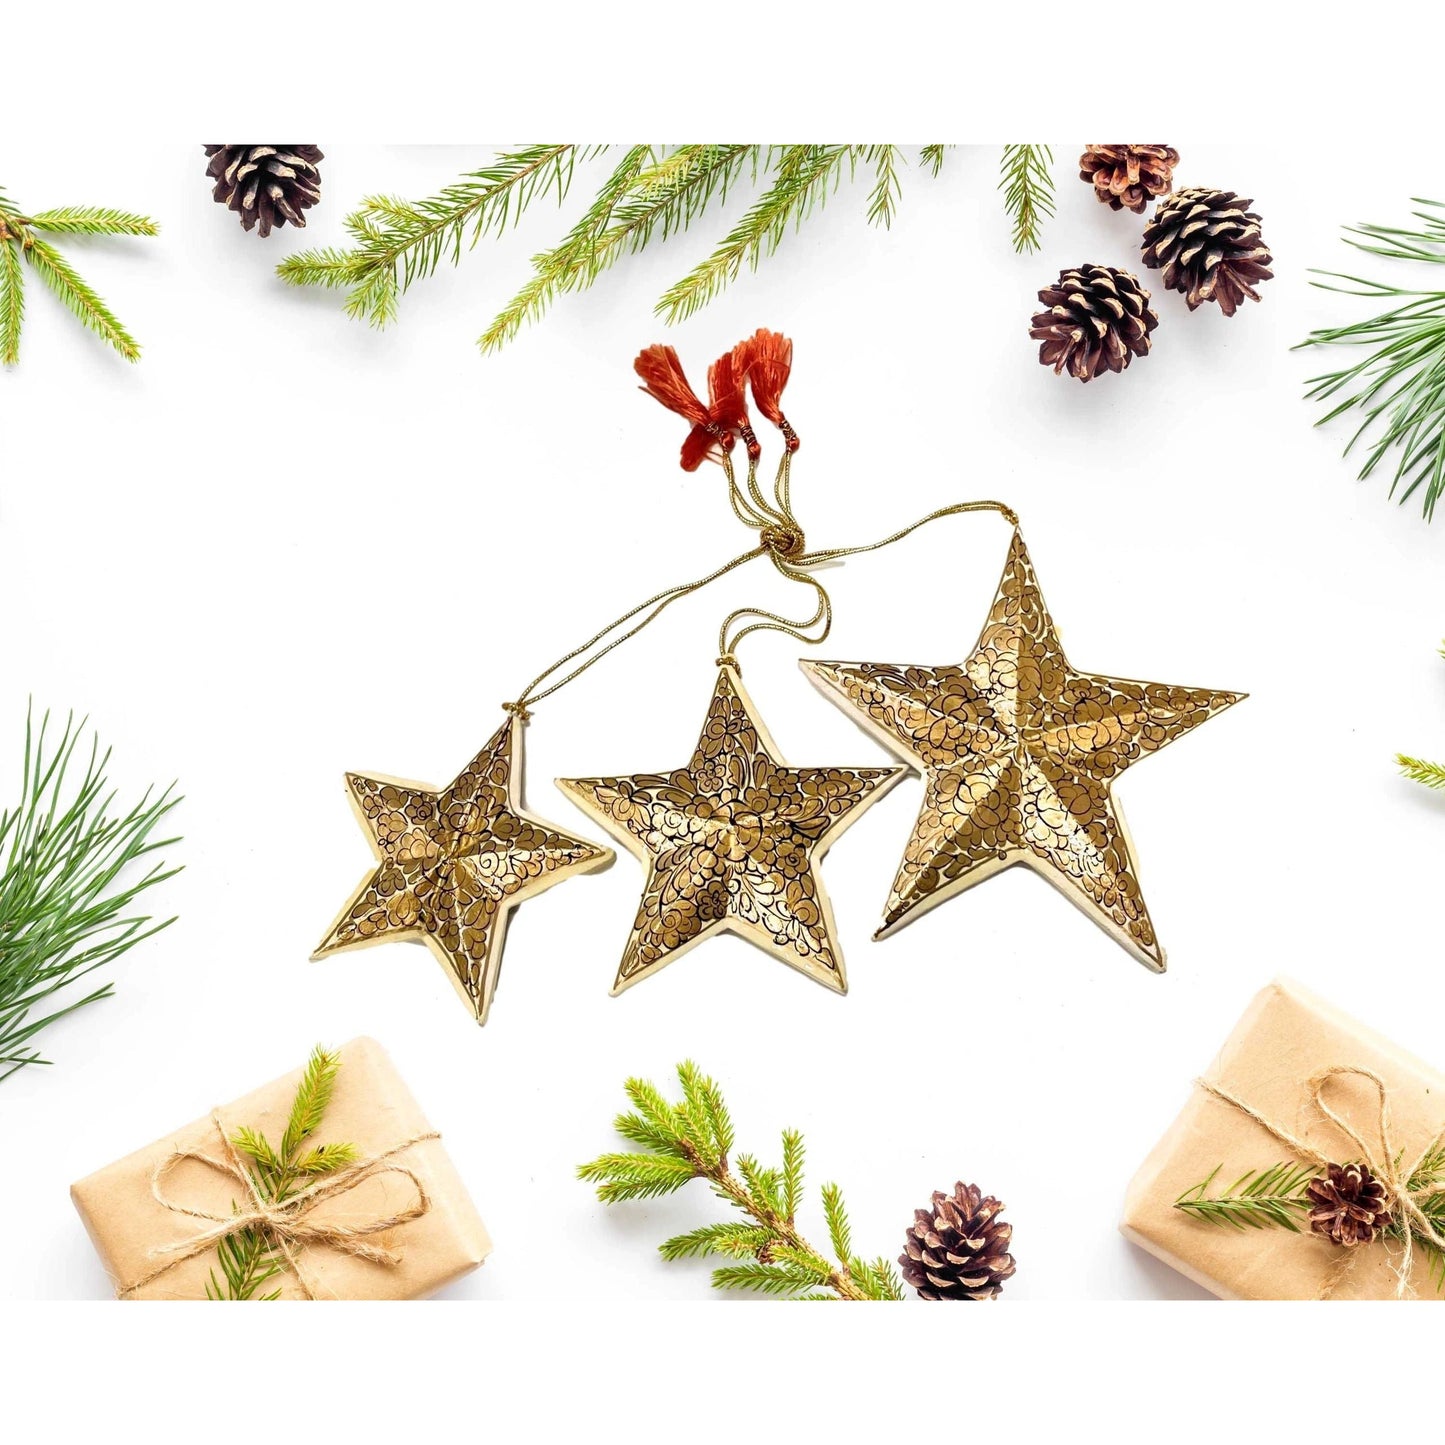 Paper Mache Star Holiday Ornament Set - Hand Made - Hand Painted